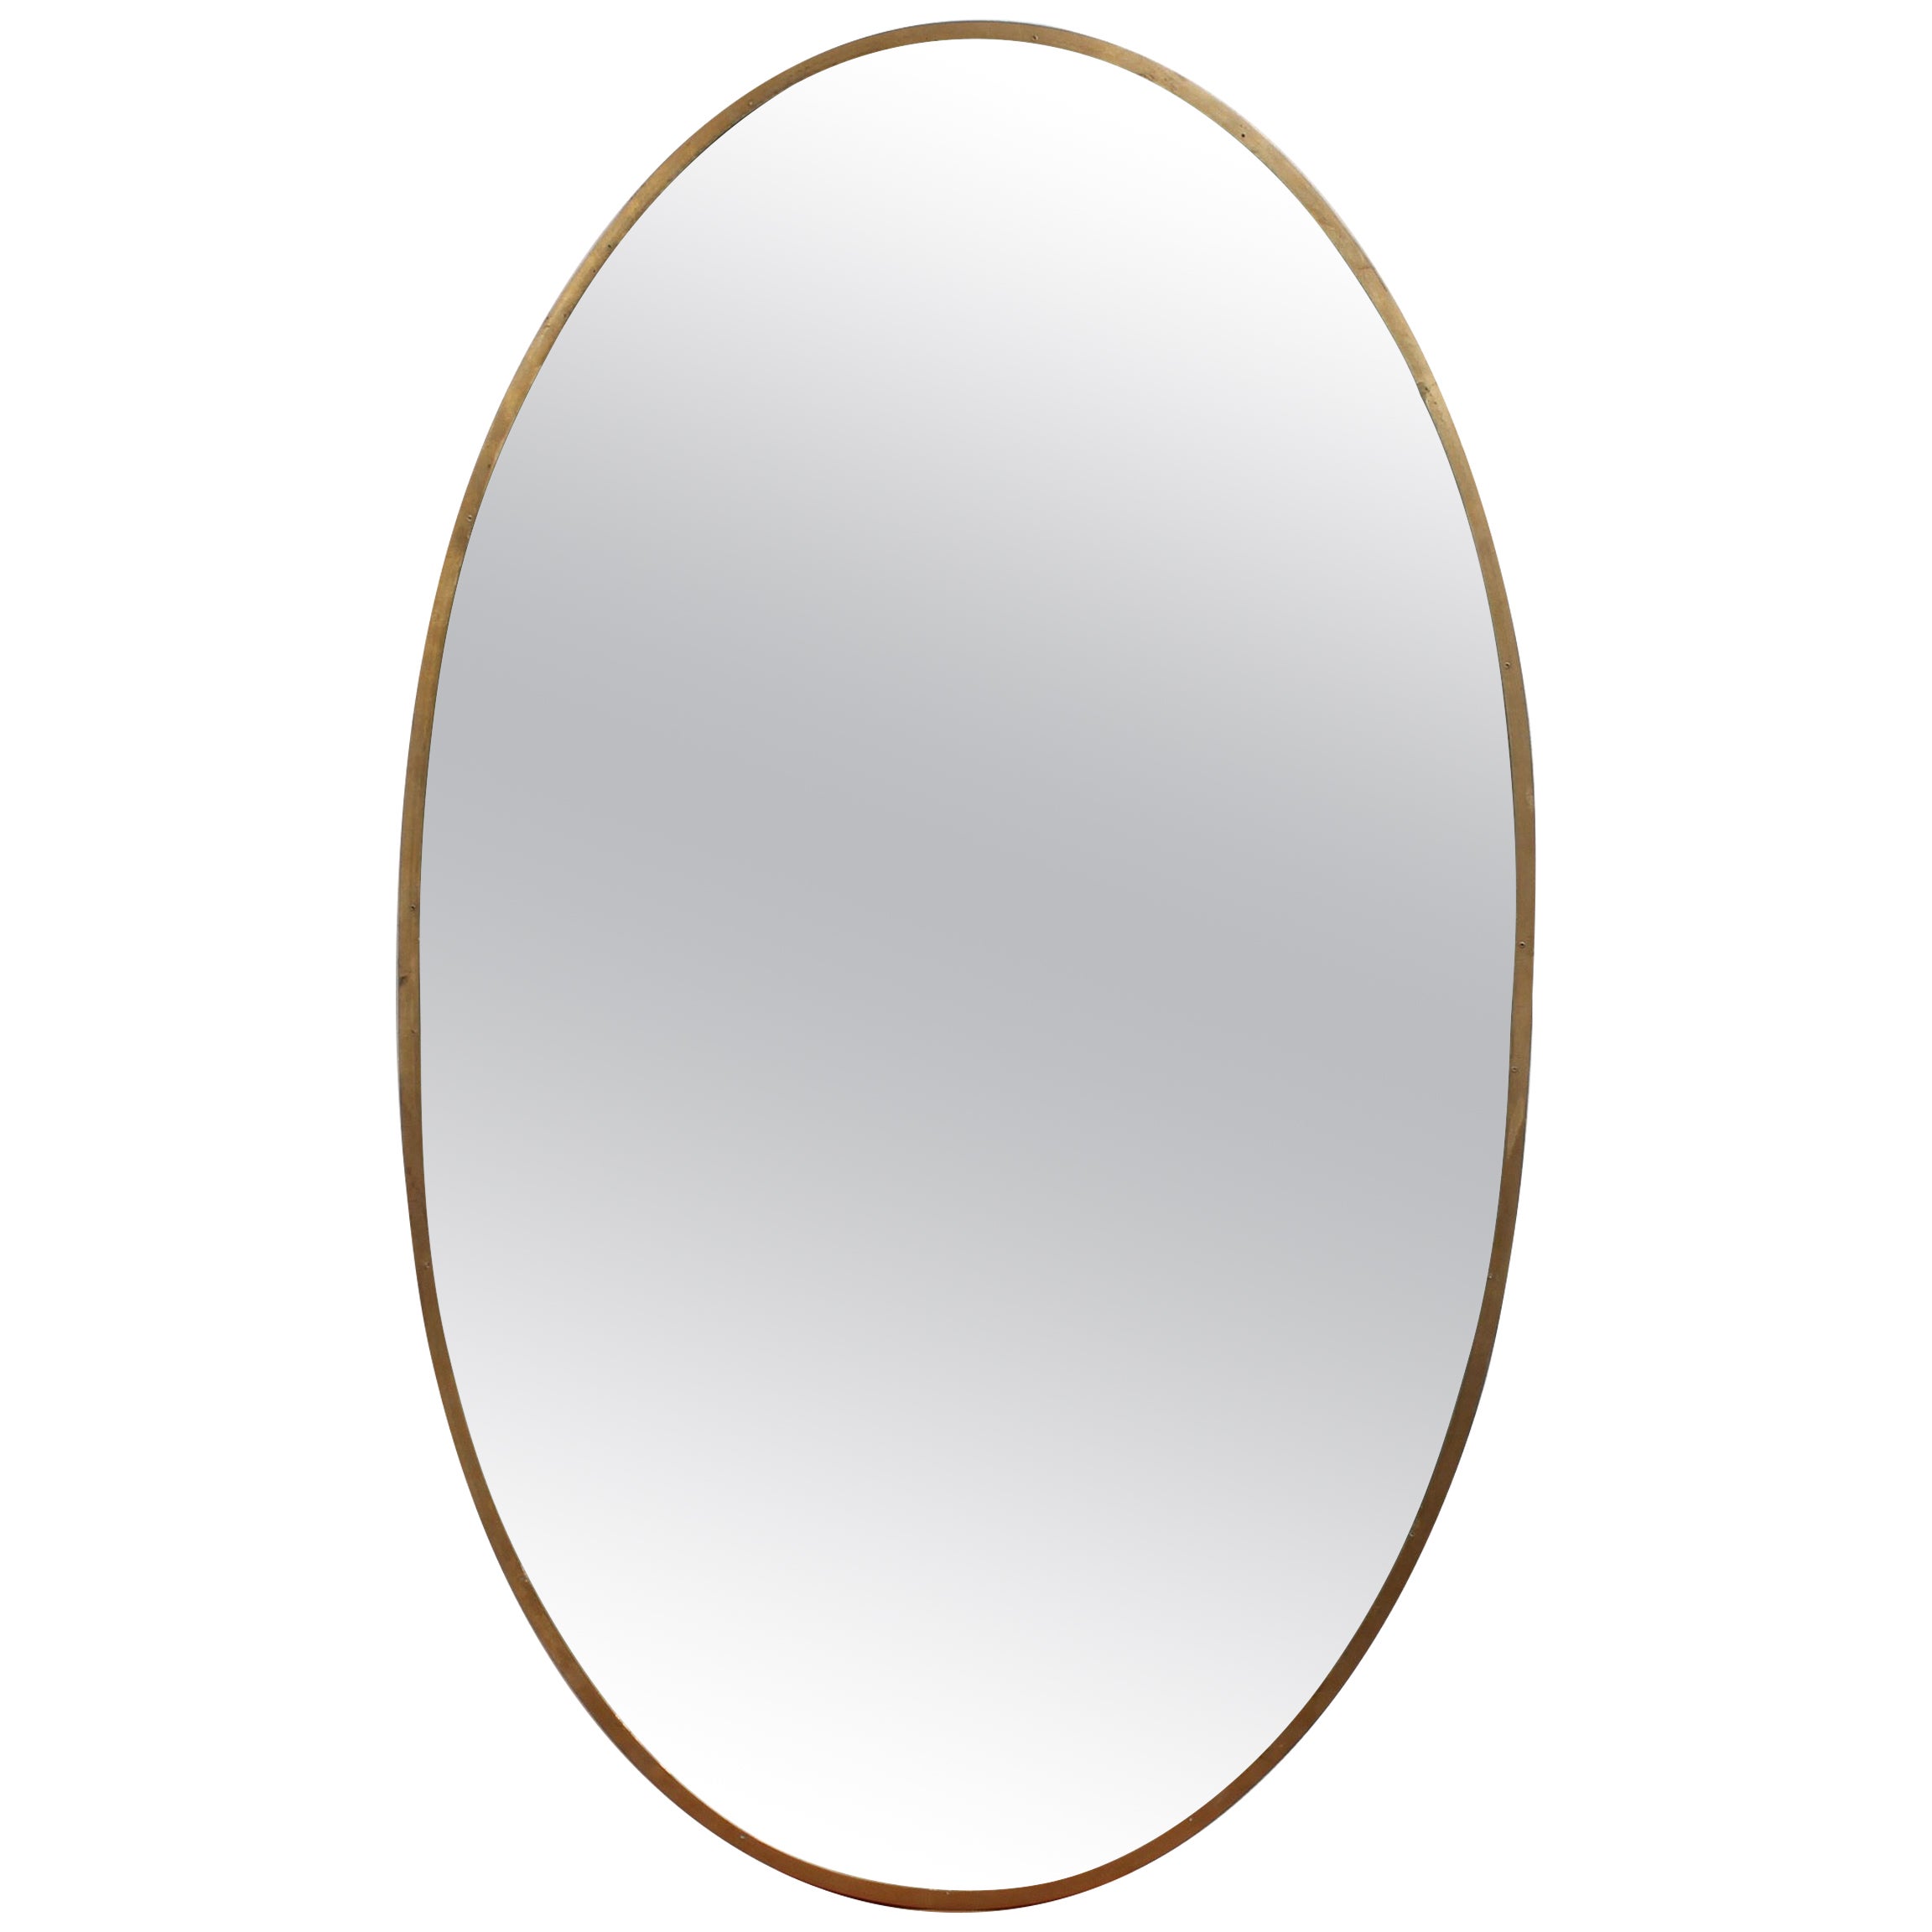 Vintage Italian Oval Wall Mirror with Brass Frame, 'circa 1950s'